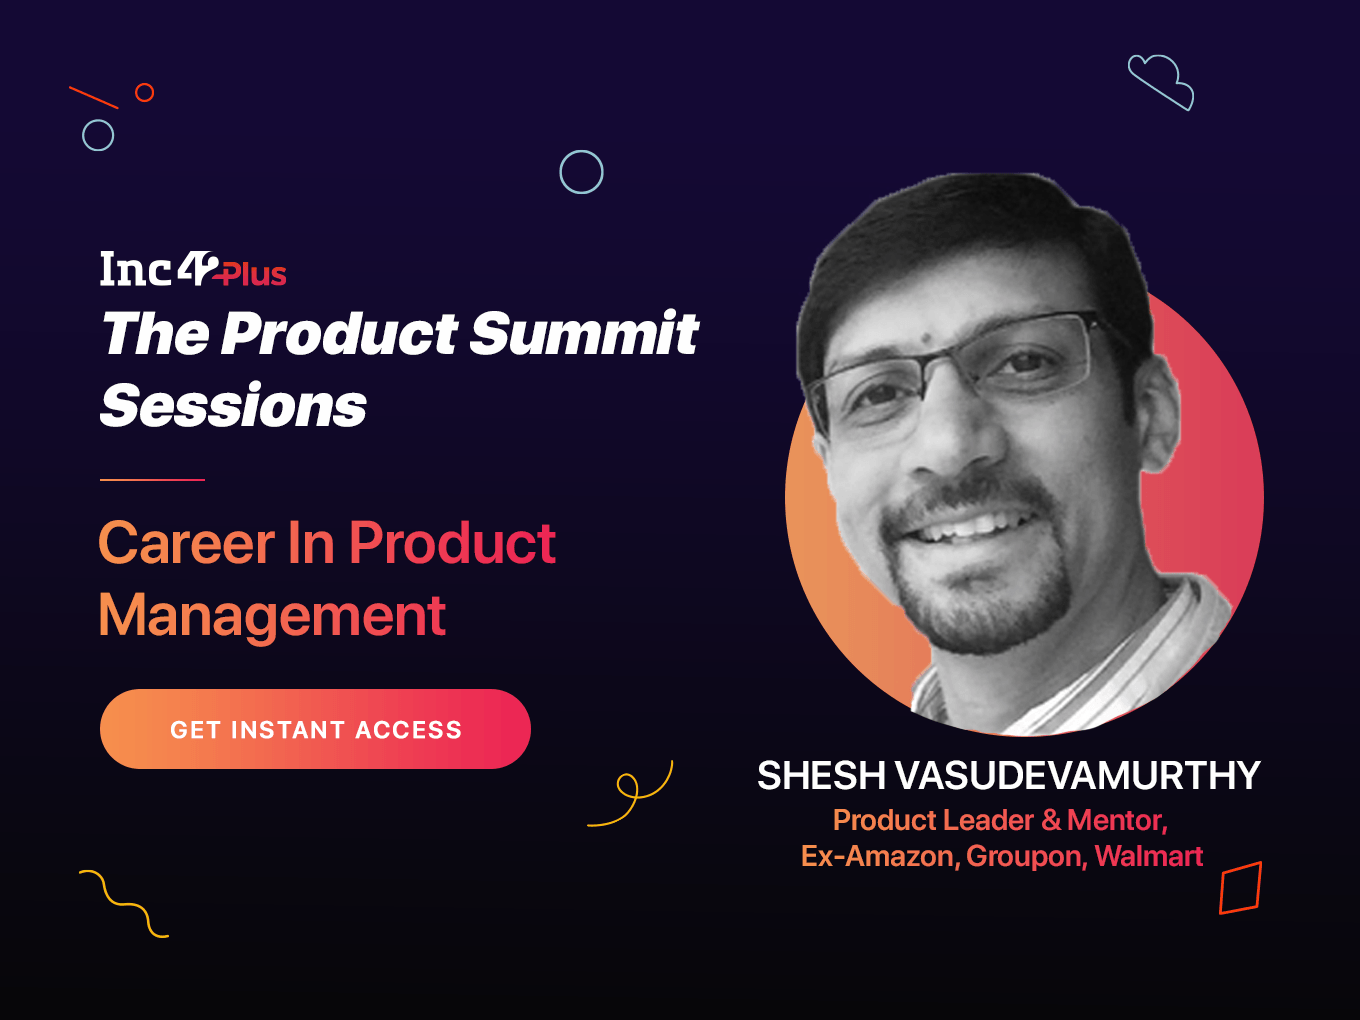 CAREER IN PRODUCT MANAGEMENT